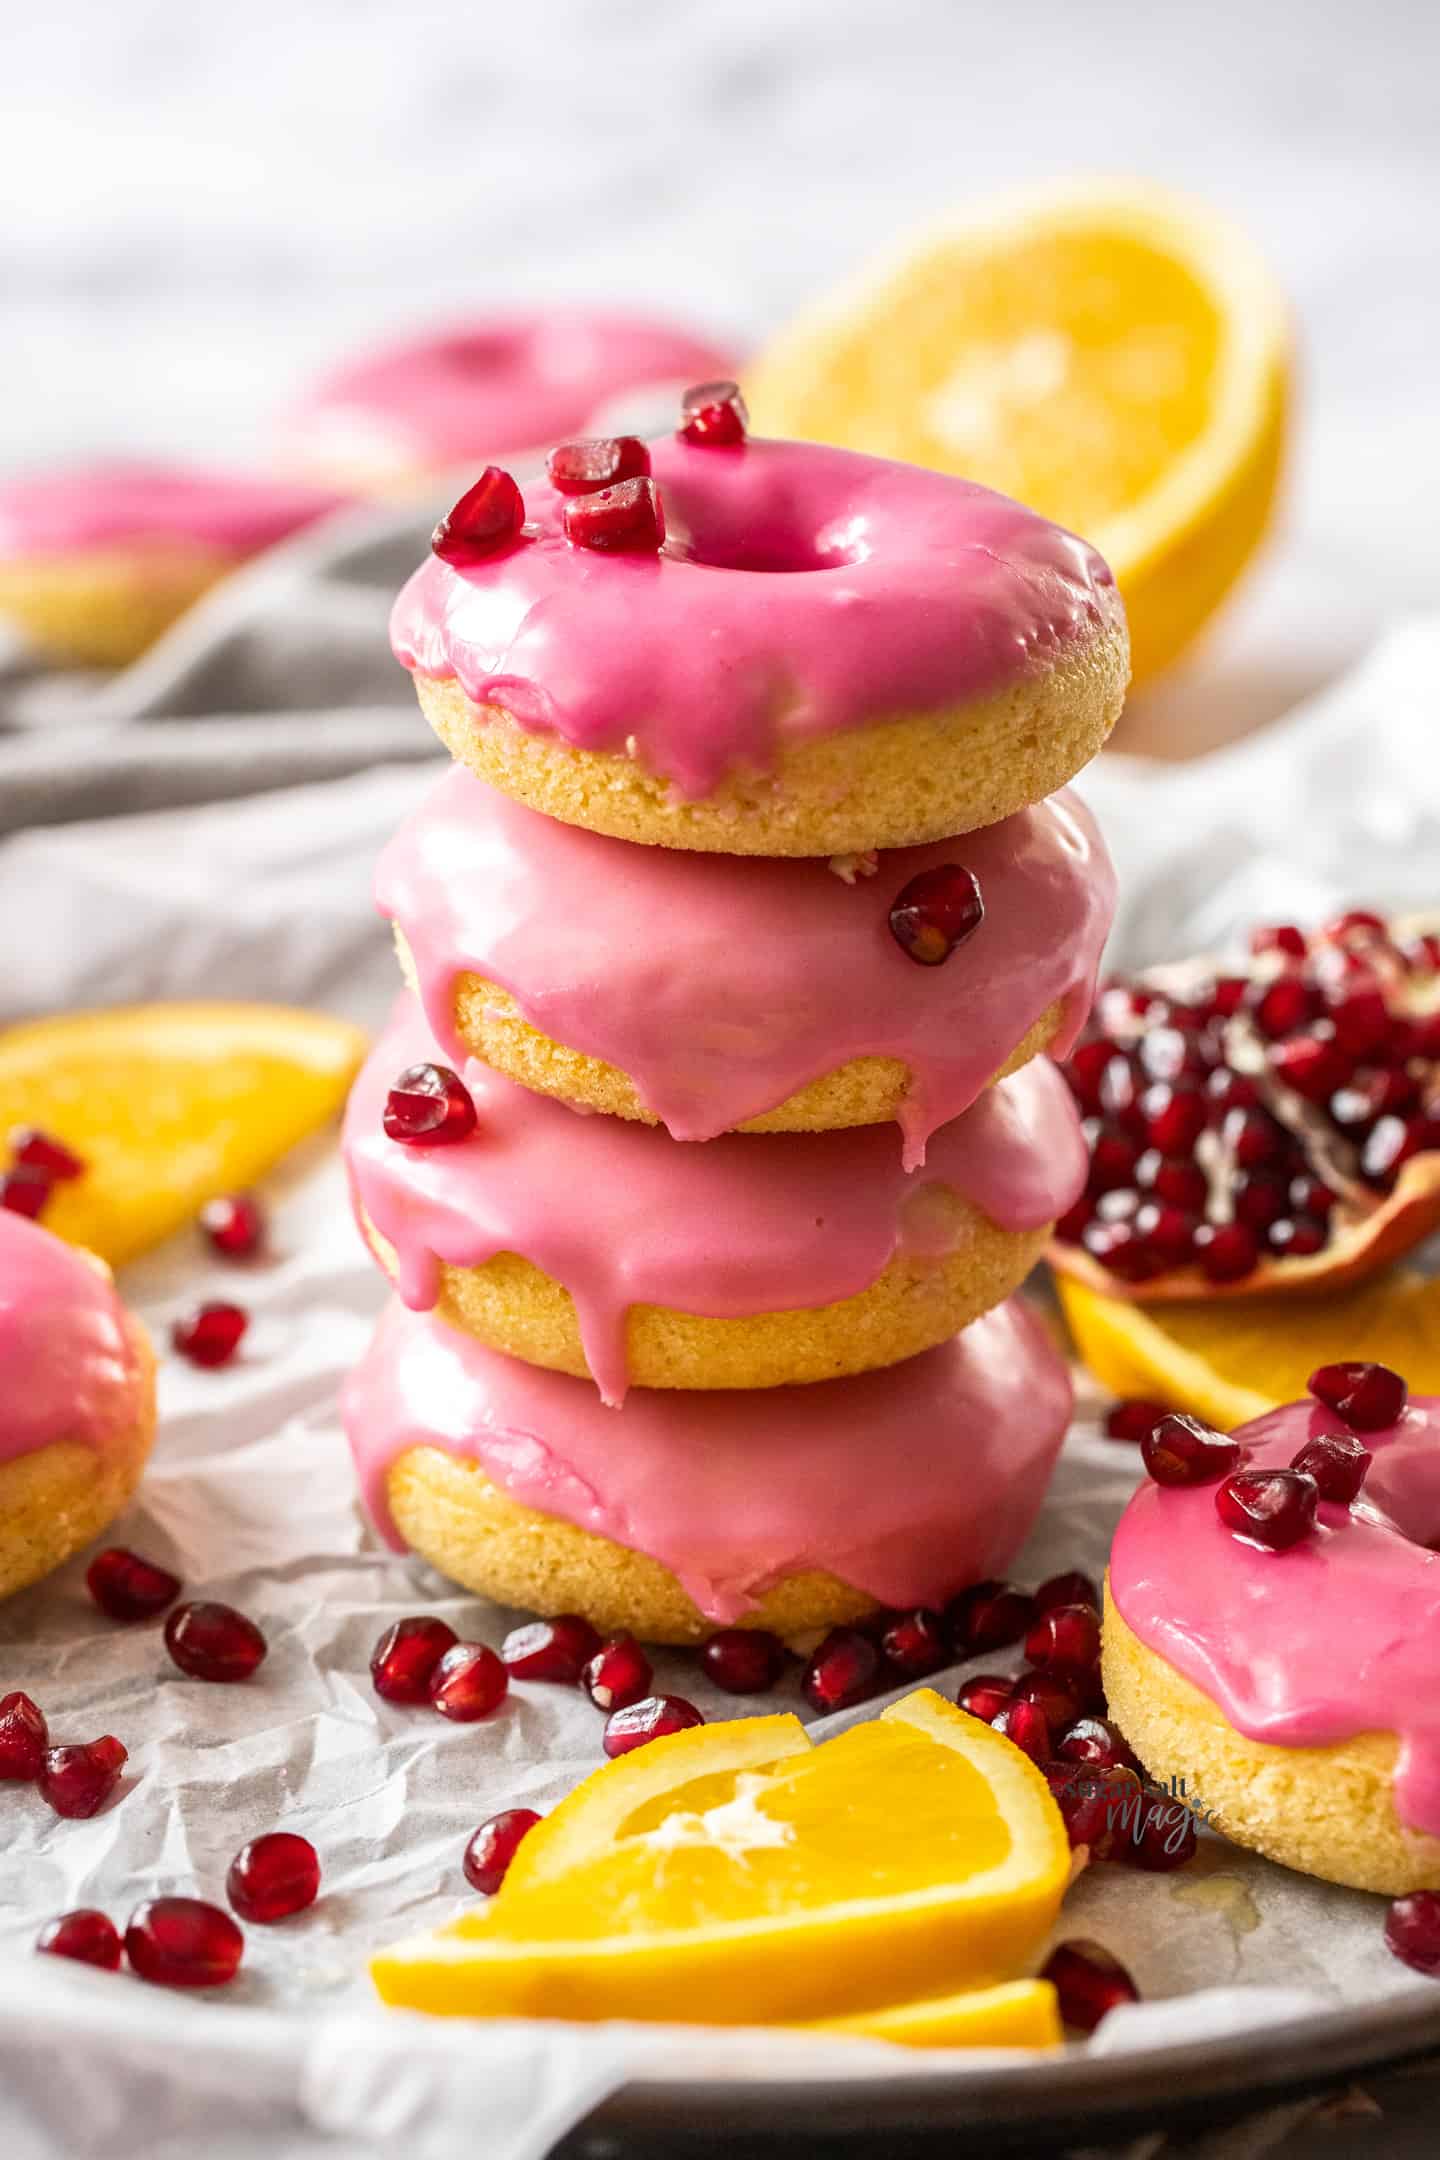 A stack of 4 donuts covered with pink icing. Pomegranate seeds are strewn around.